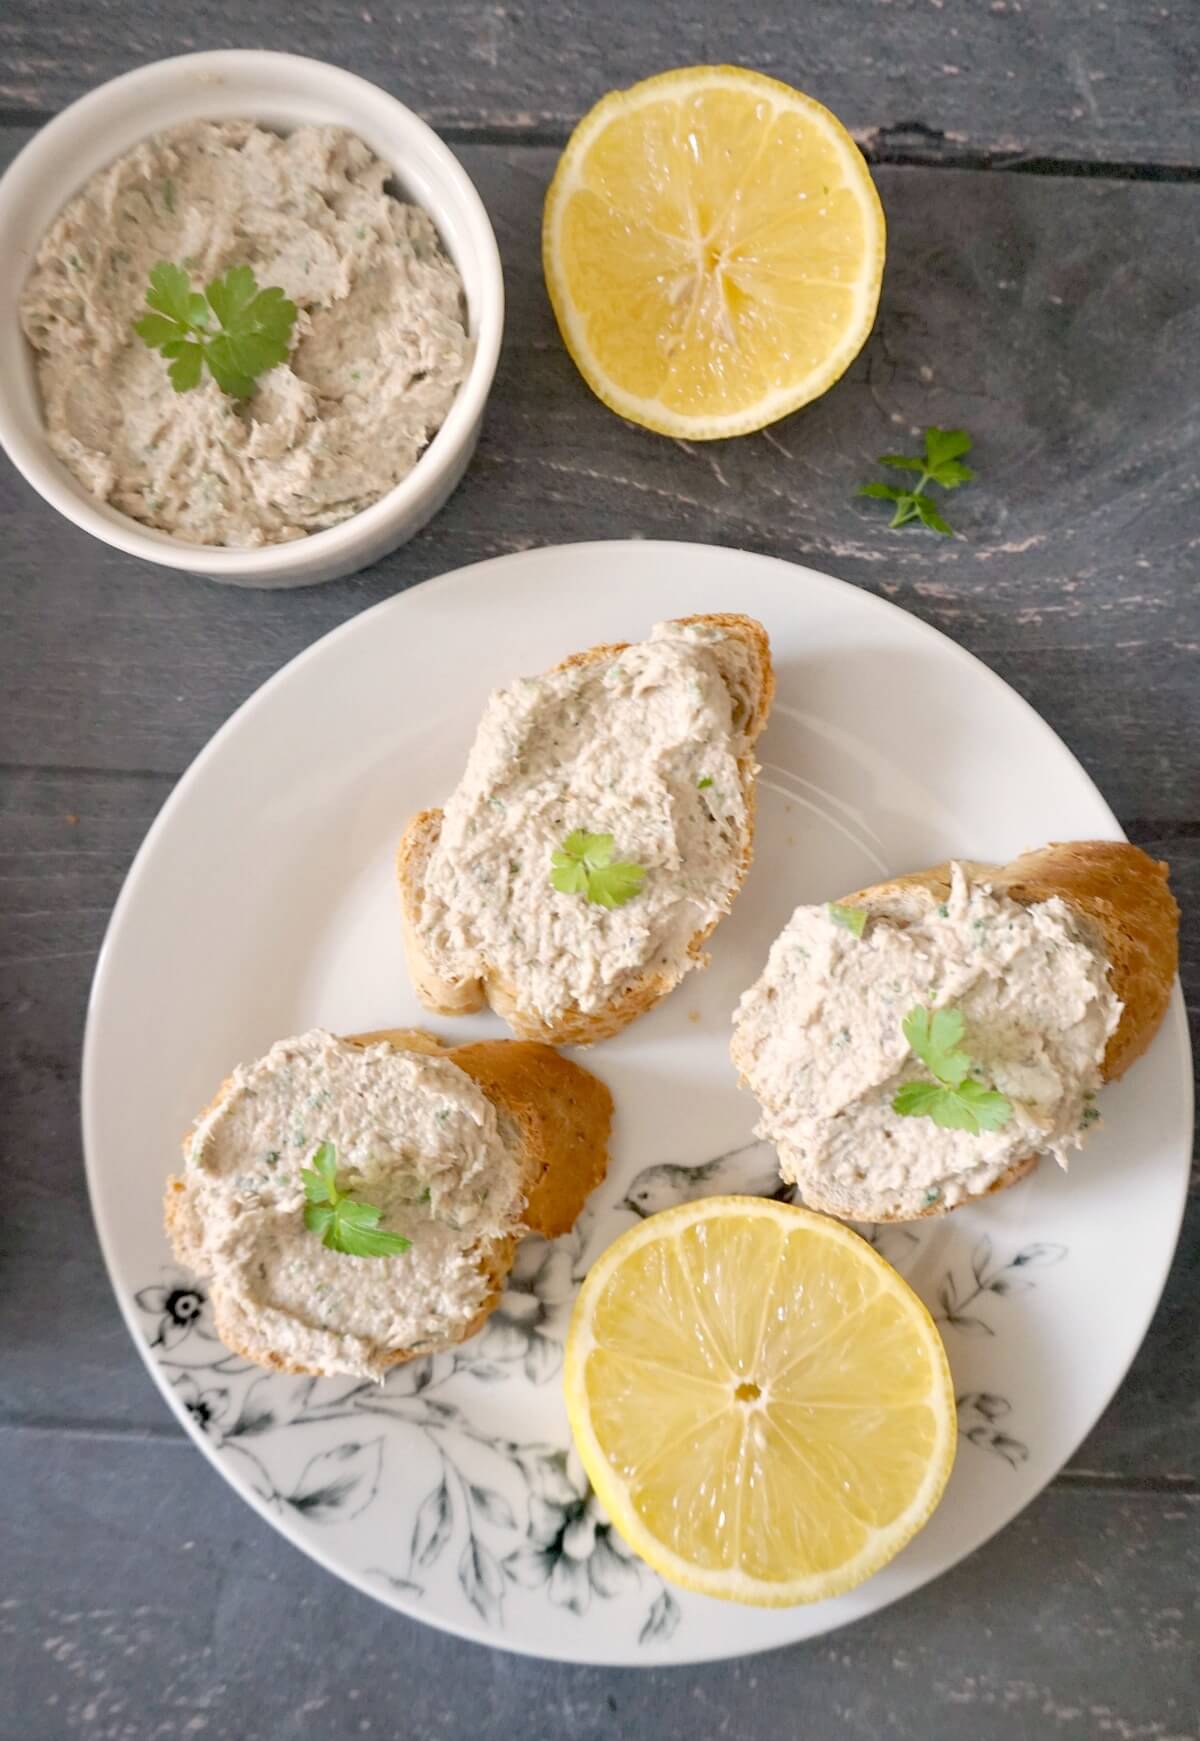 Overhead shoot of a white plate with slices of bread spread with mackerel pate, and a lemon slice too. Next to the plate half a lemon and a ramekin of more pate.